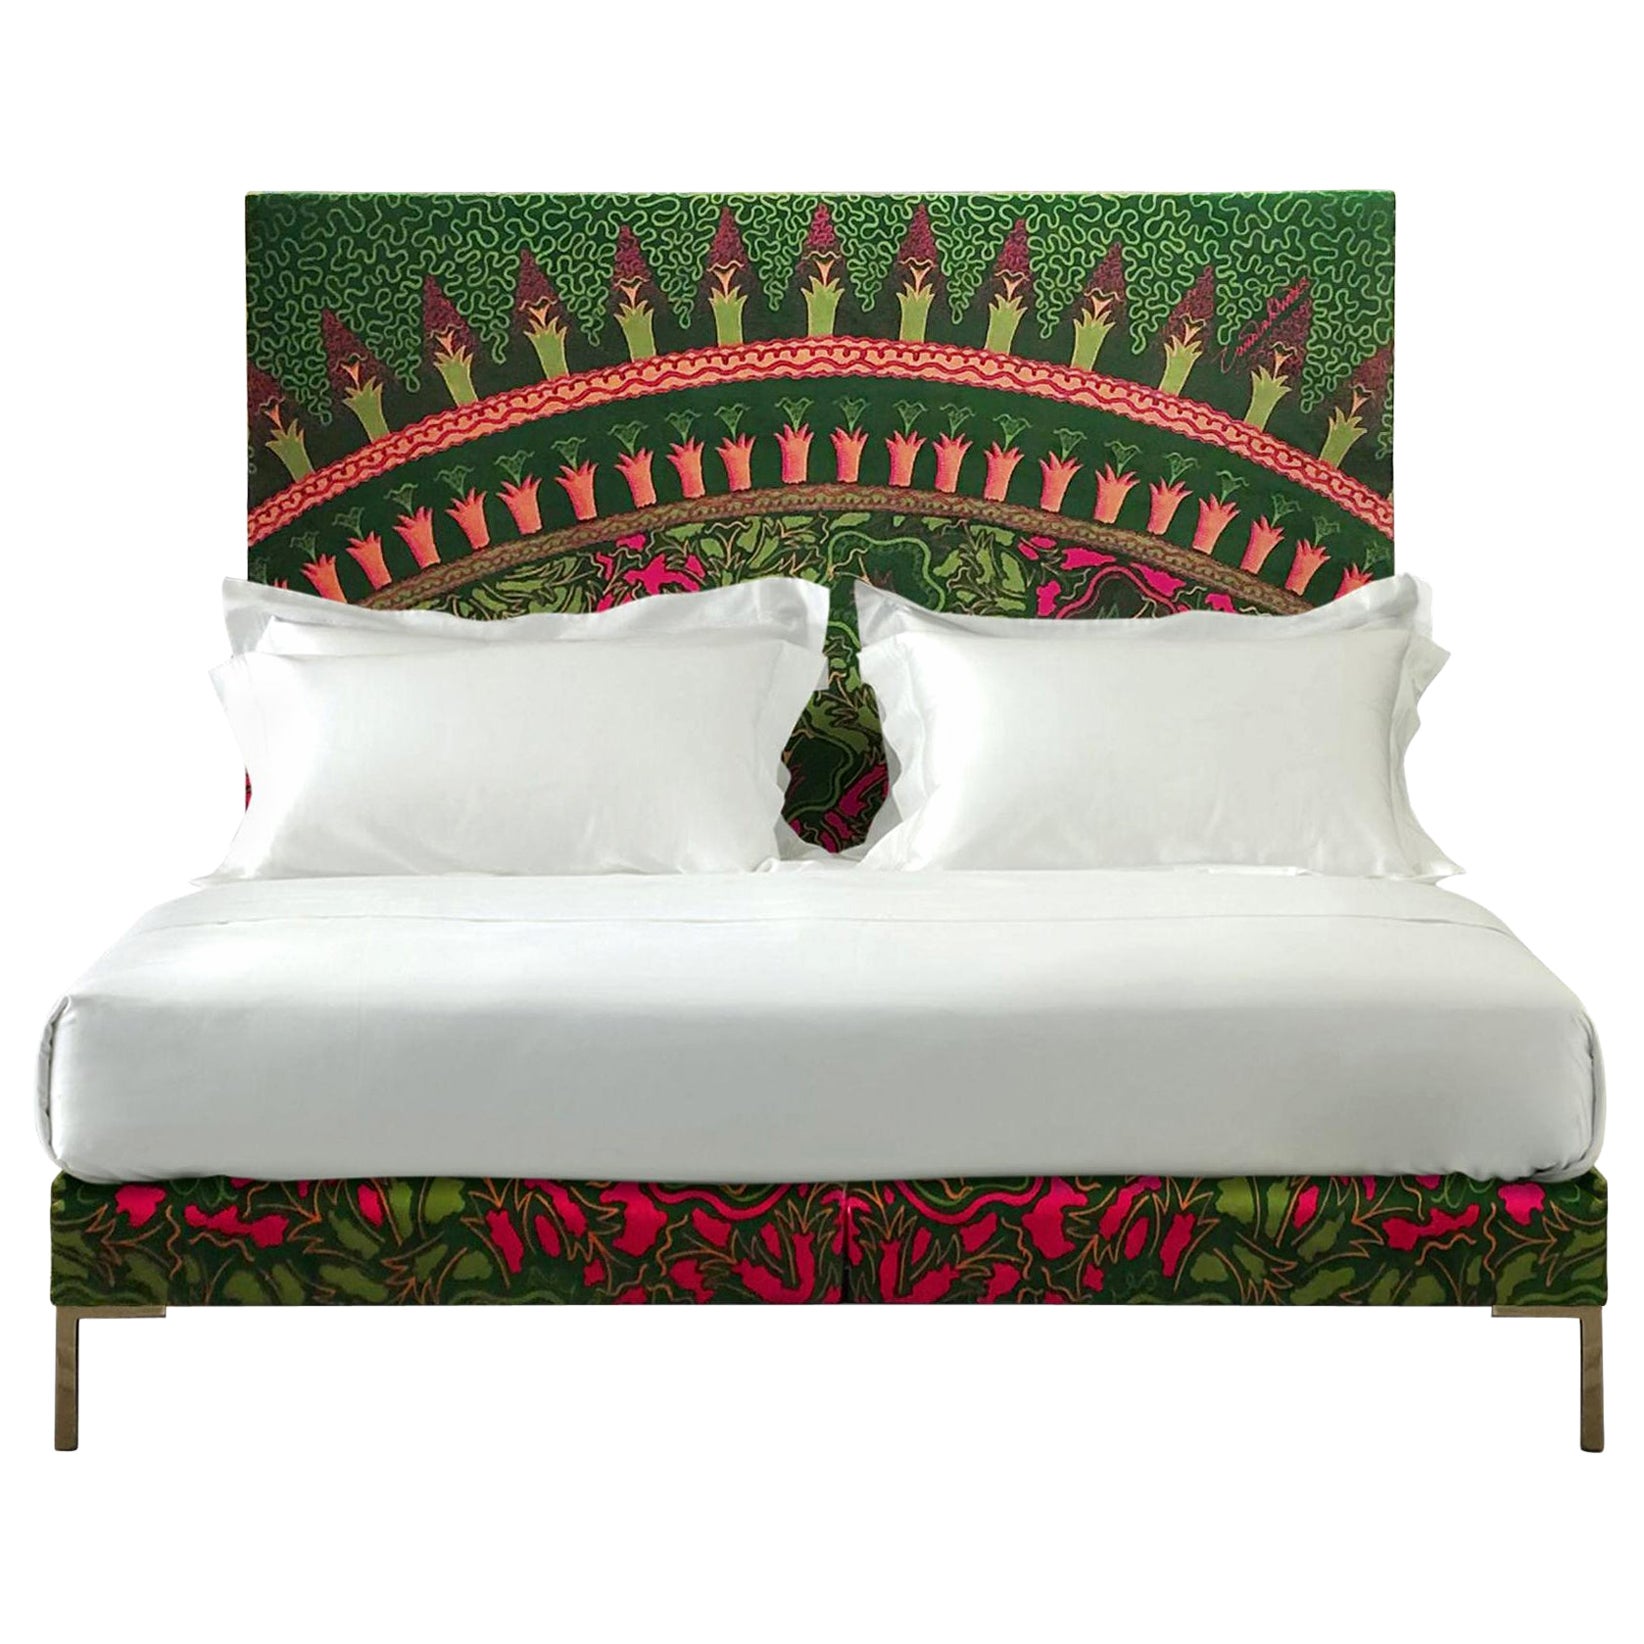 Savoir Lilies Headboard and Nº4 Bed Set, Eastern King Size, by Zandra Rhodes For Sale